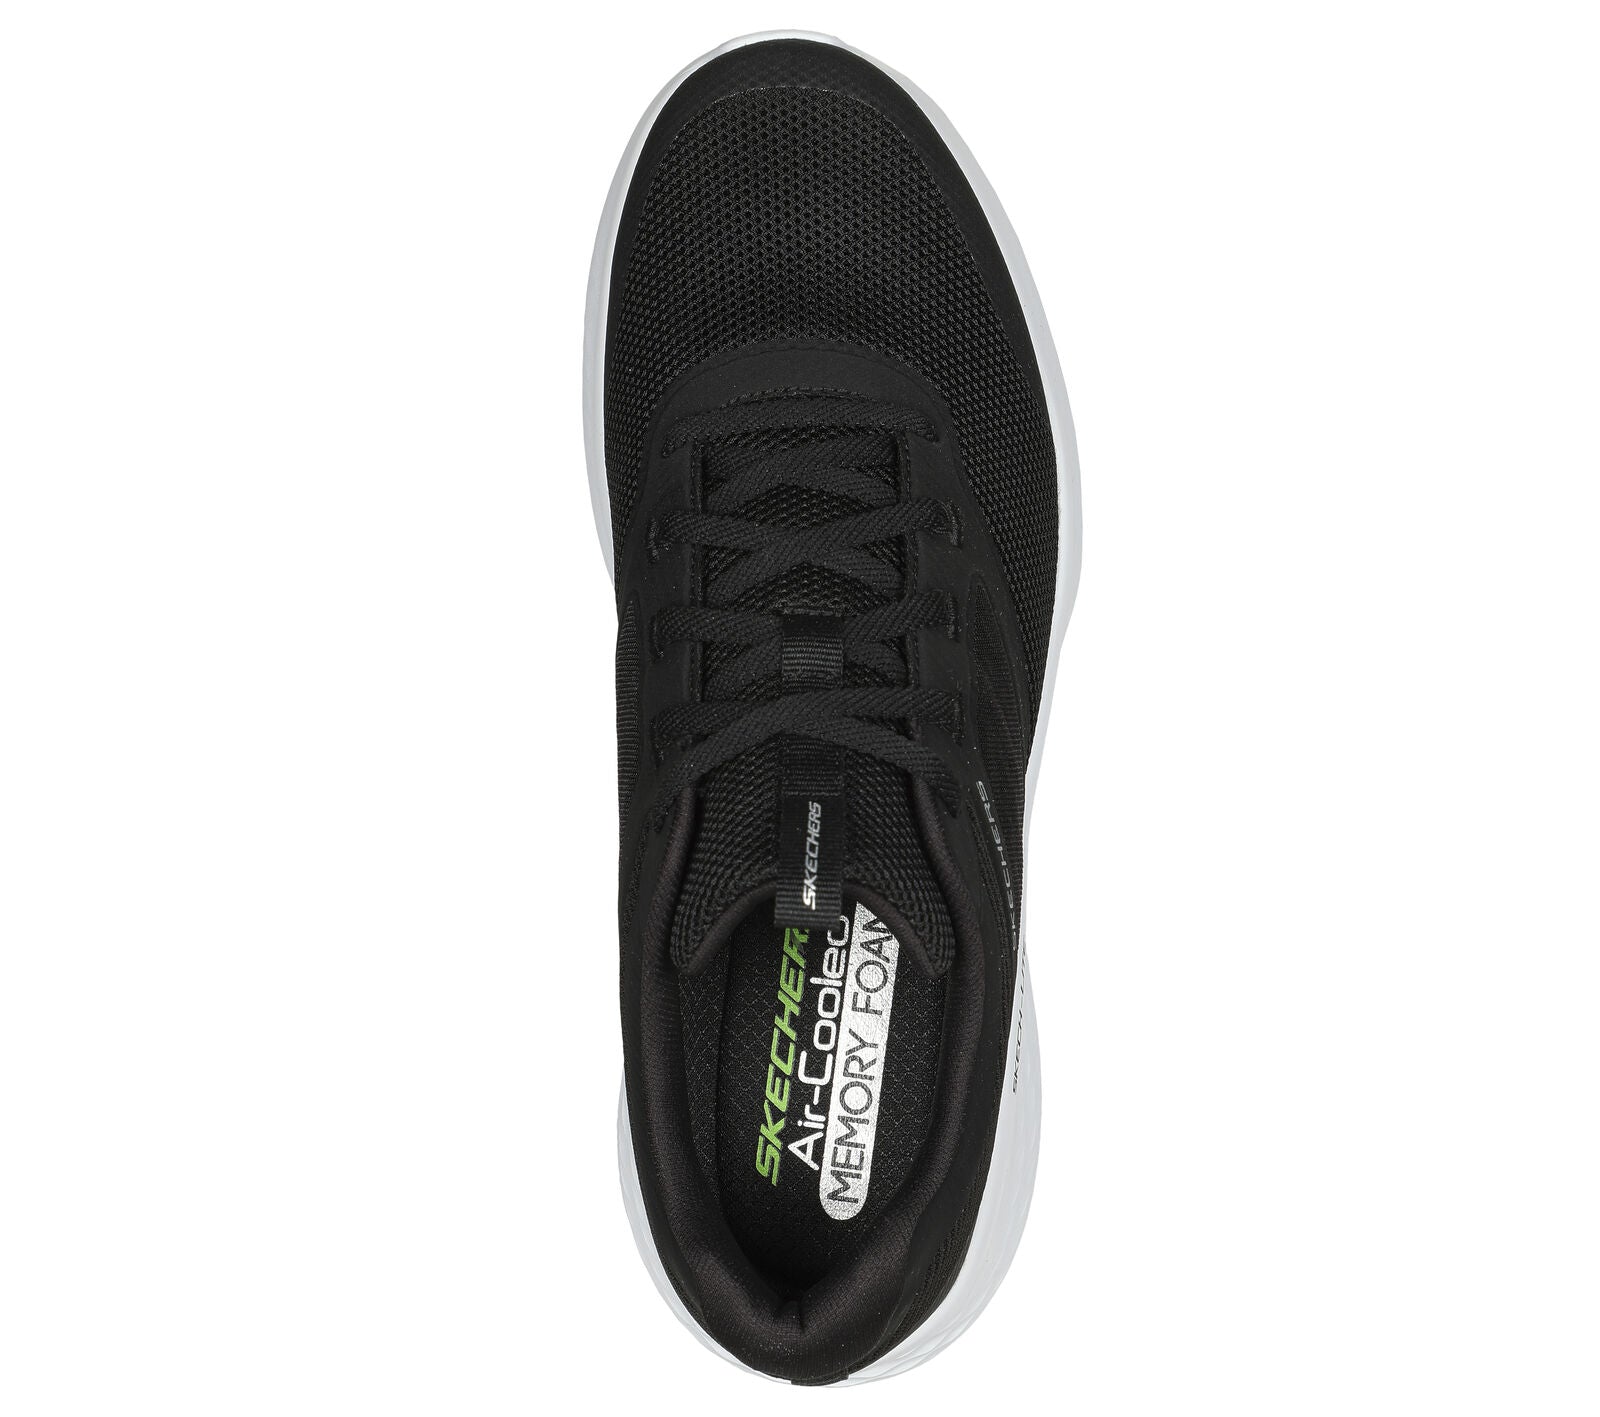 Skechers 232594 Skech Lite Pro New Century Mens Black And White Textile Lace Up Trainers